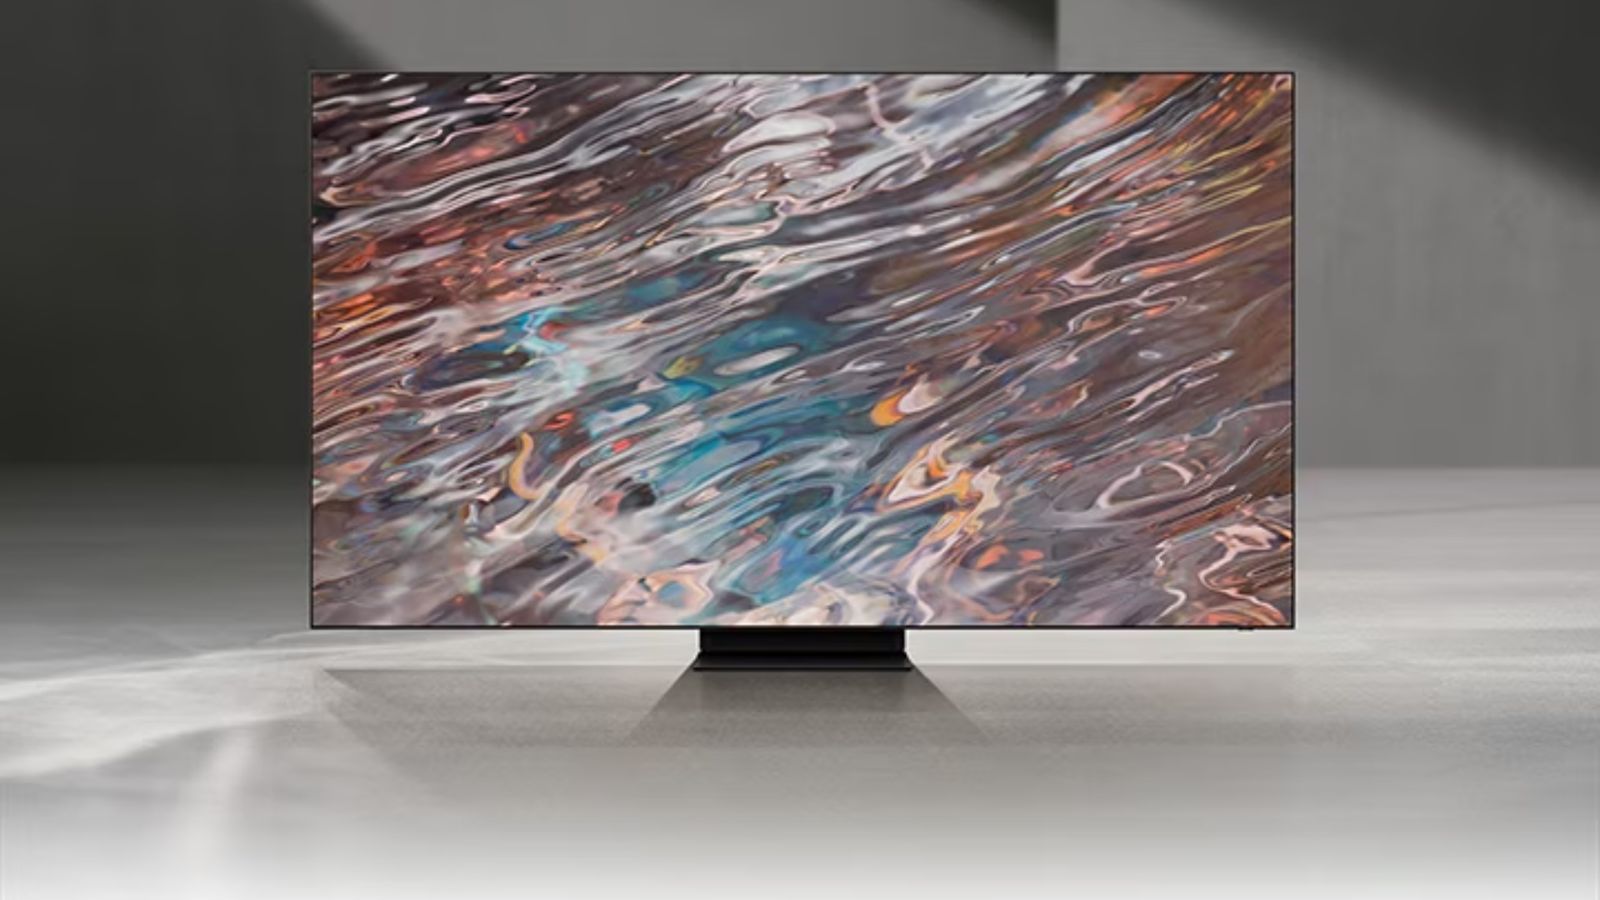 Image of a large flatscreen TV featuring water rippling on the display.